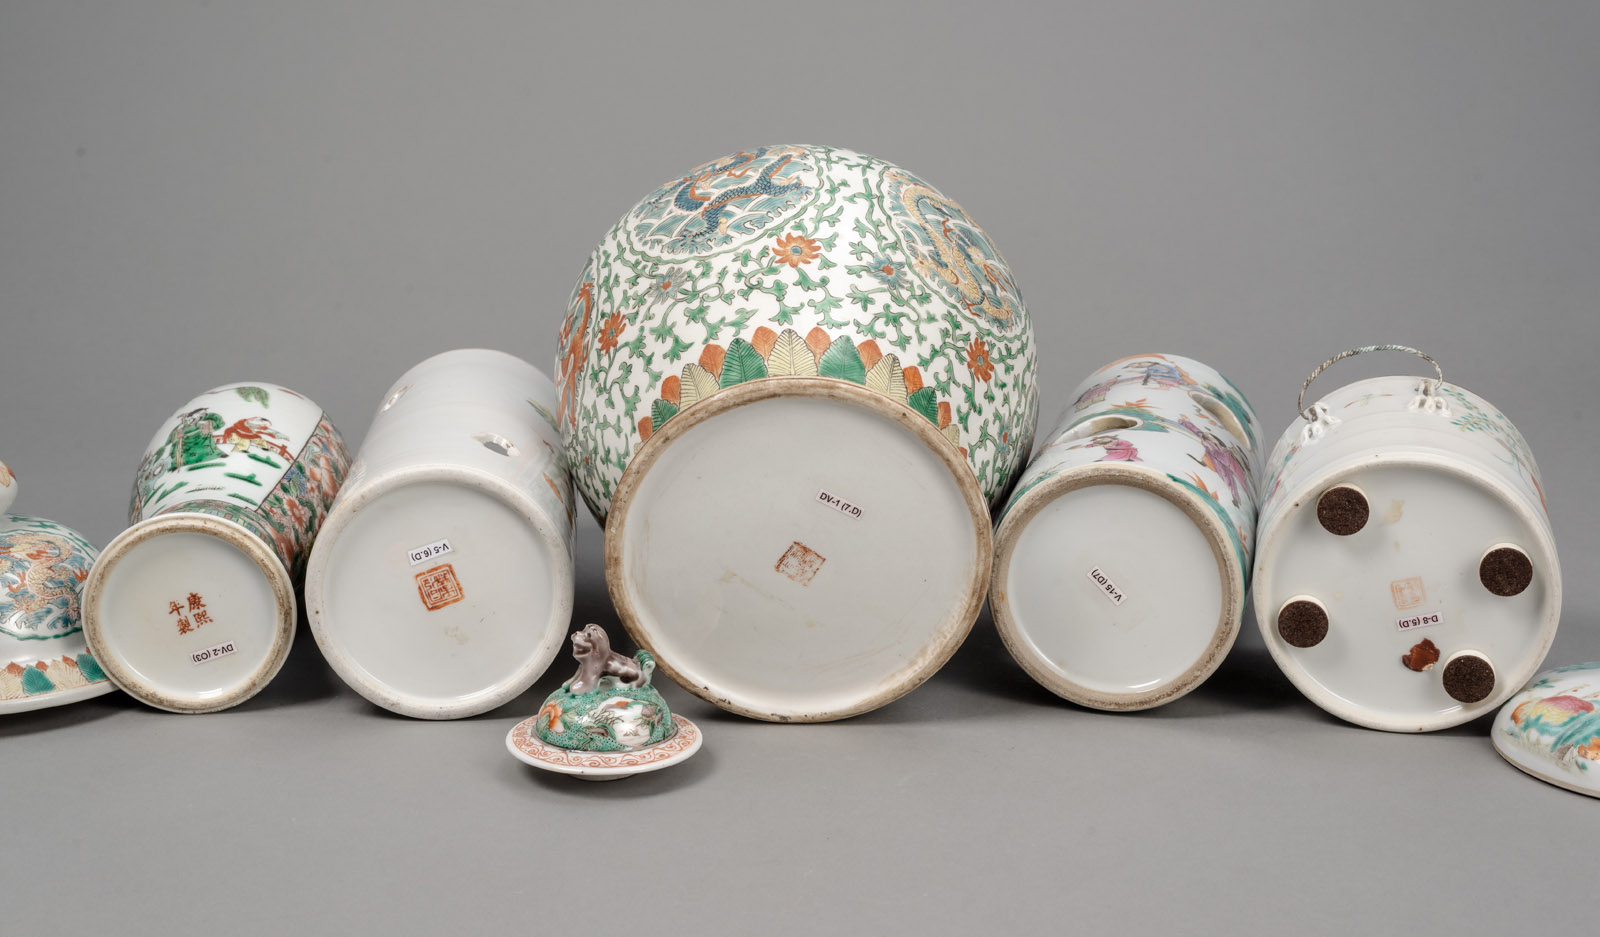 TWO 'FAMILLE ROSE' PORCELAIN HAT STANDS, TWO VASES AND COVERS, A LIDDED BOX, AND TWO STEM TRAYS, E. - Image 4 of 4